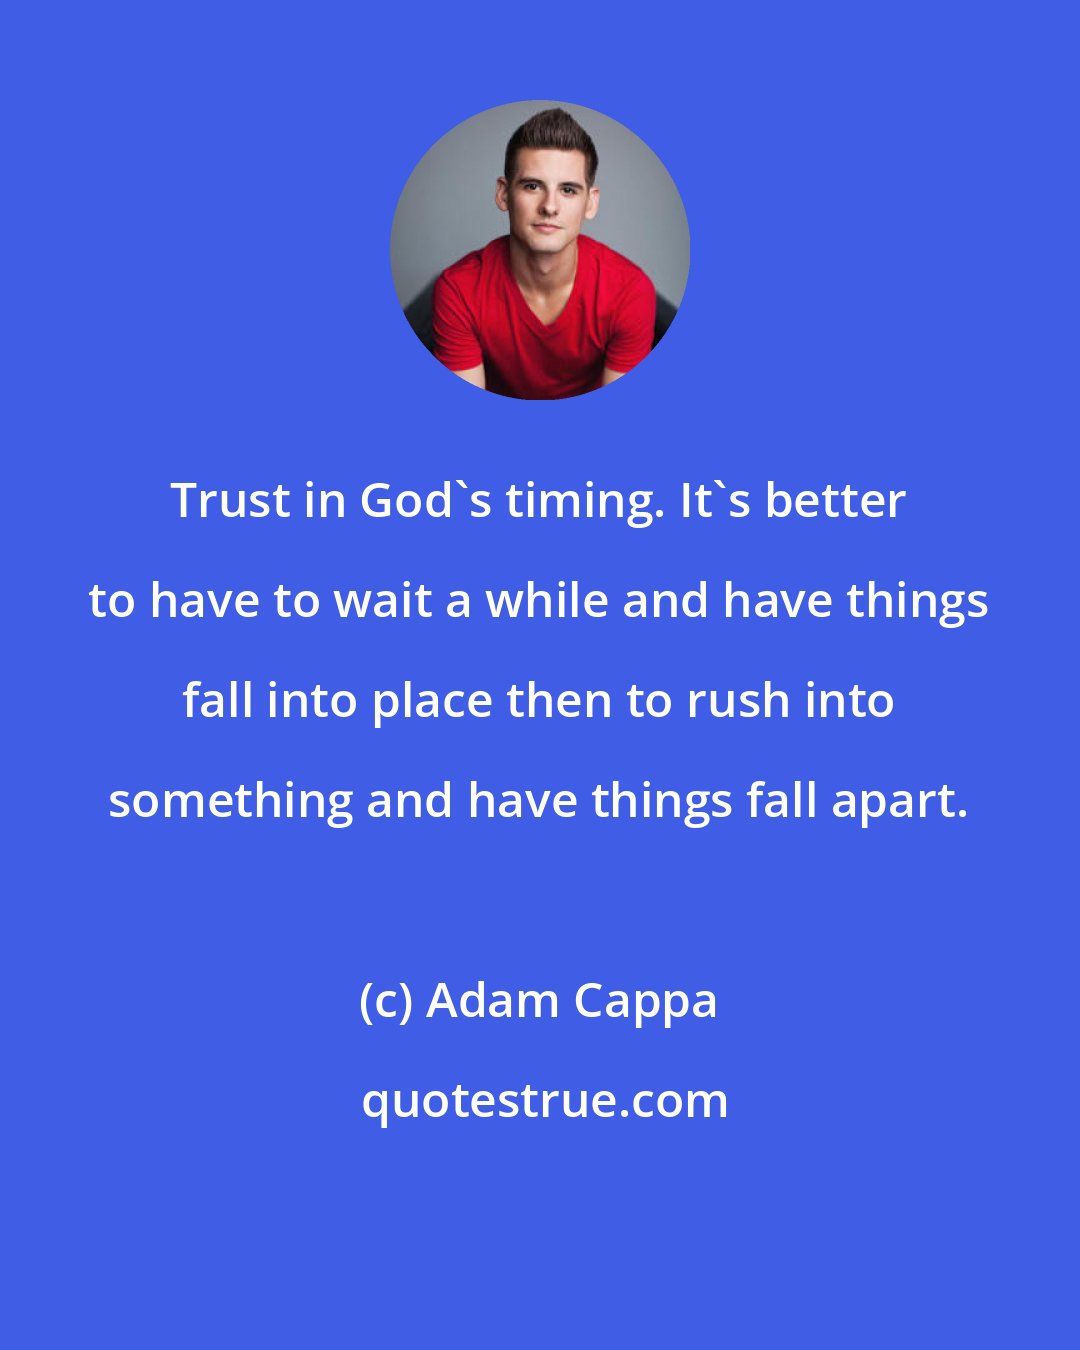 Adam Cappa: Trust in God's timing. It's better to have to wait a while and have things fall into place then to rush into something and have things fall apart.